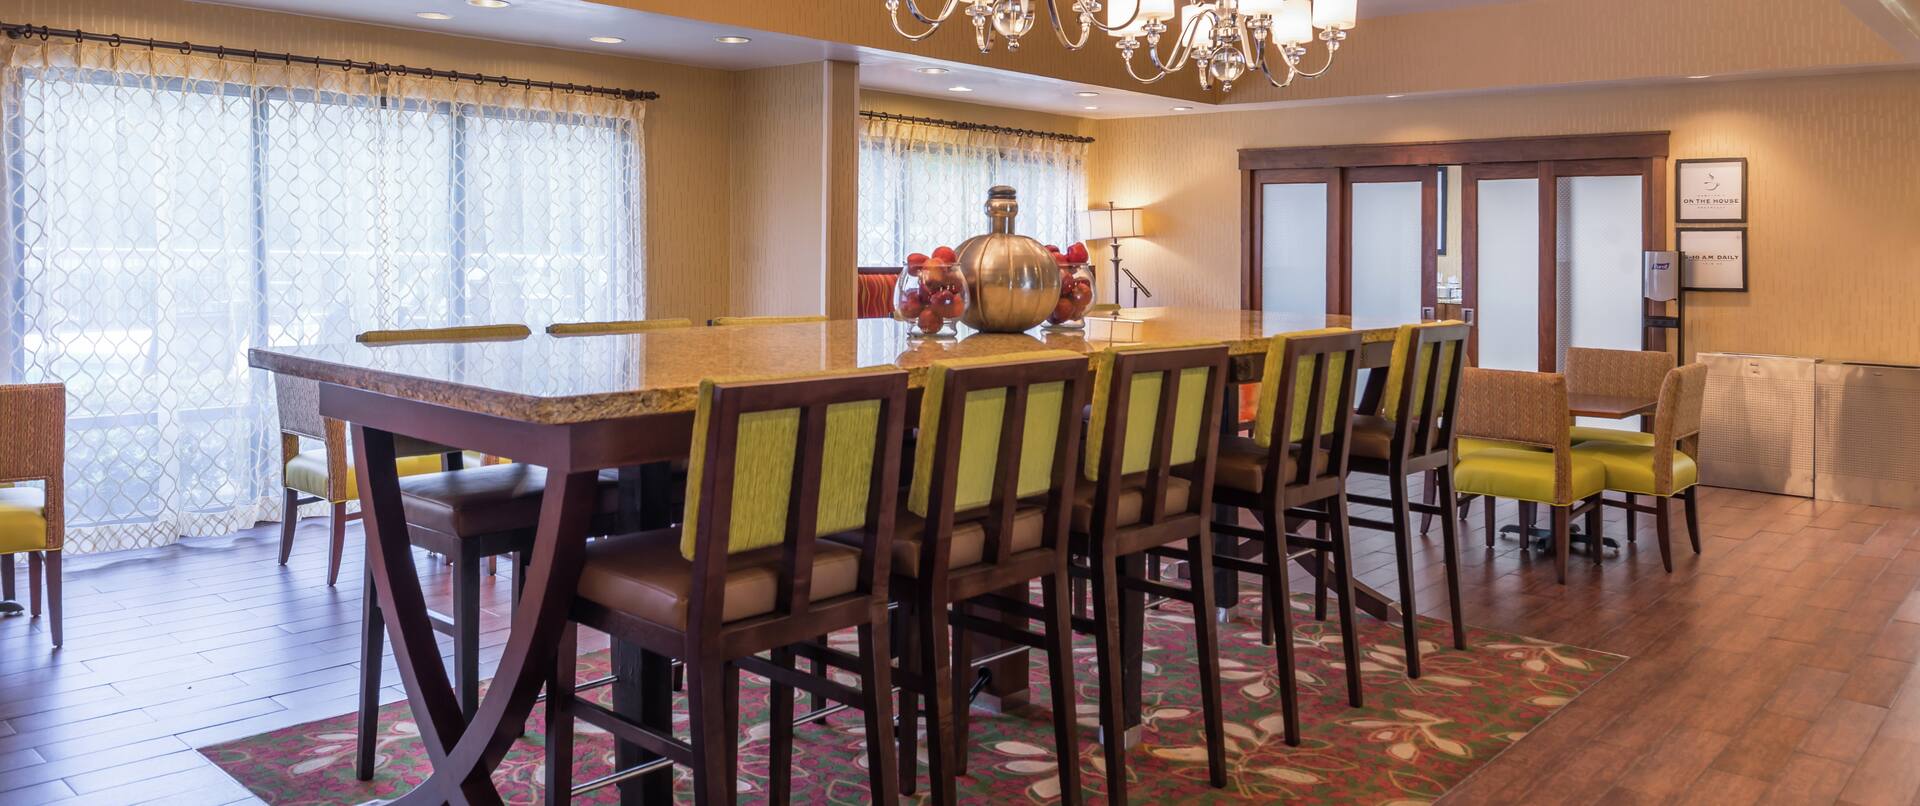 Seating for 10 at Hotel Community Table